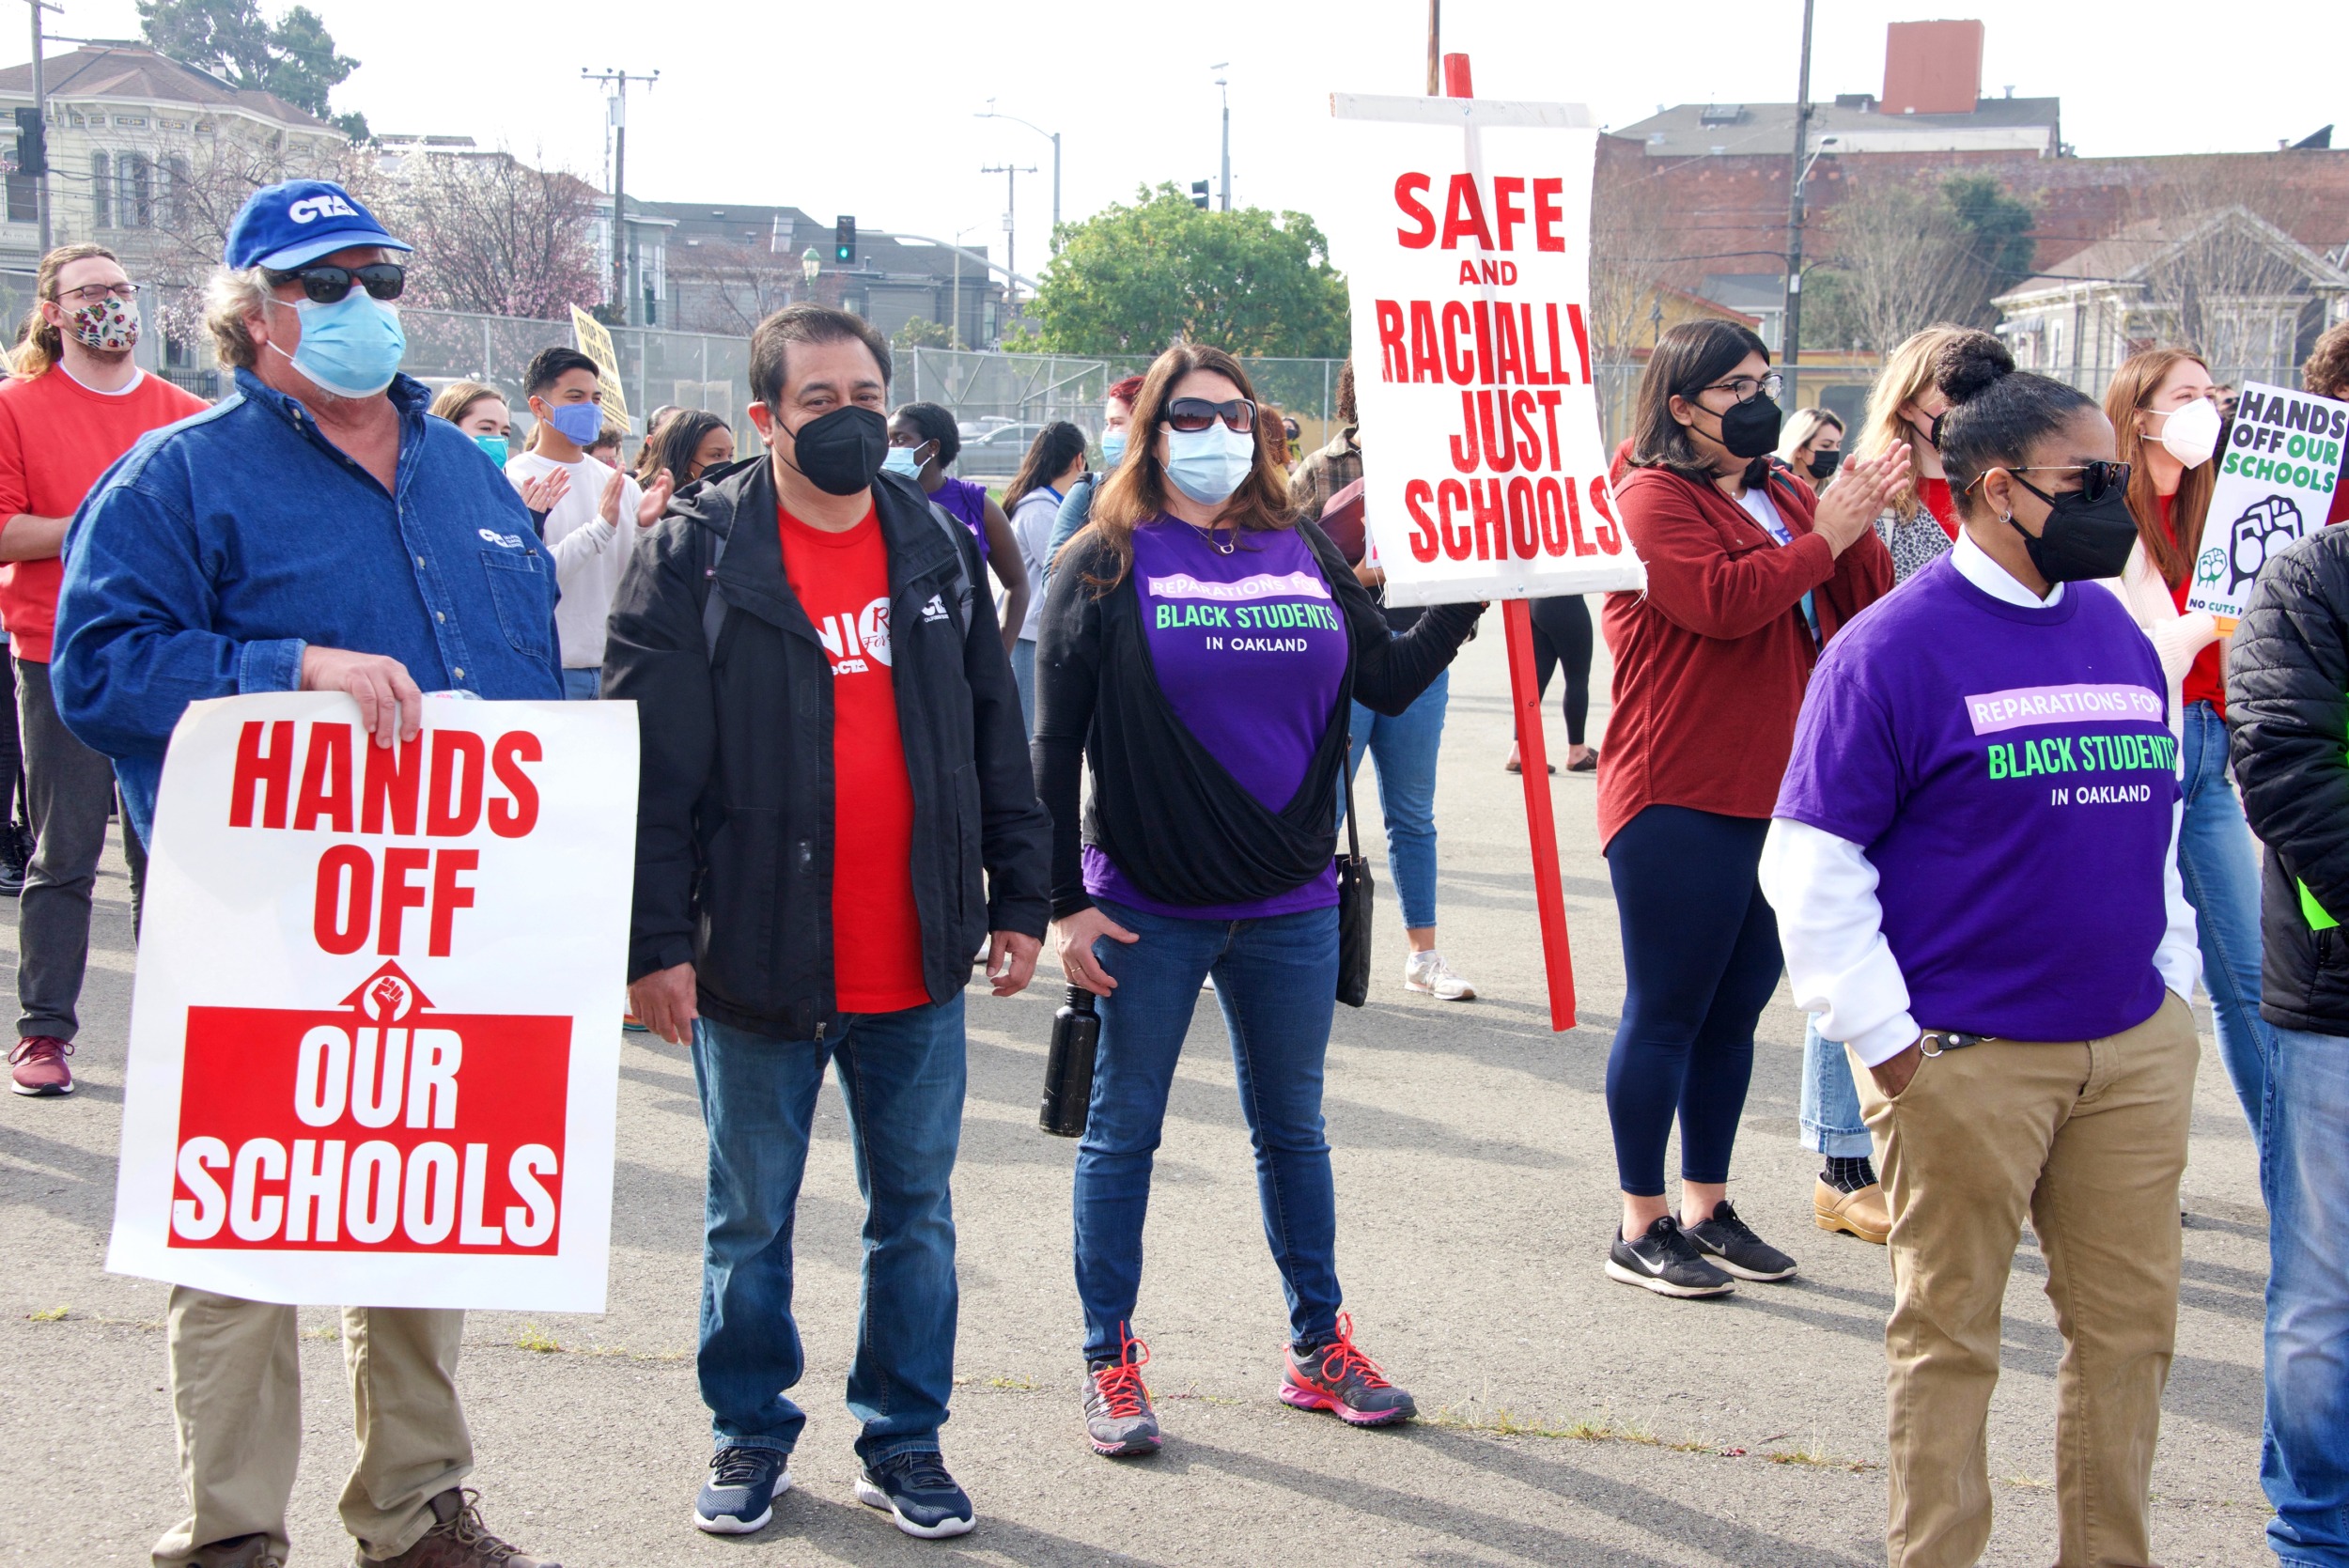 k-12 enrollment decline: Groups of adults stand in street with protest signs